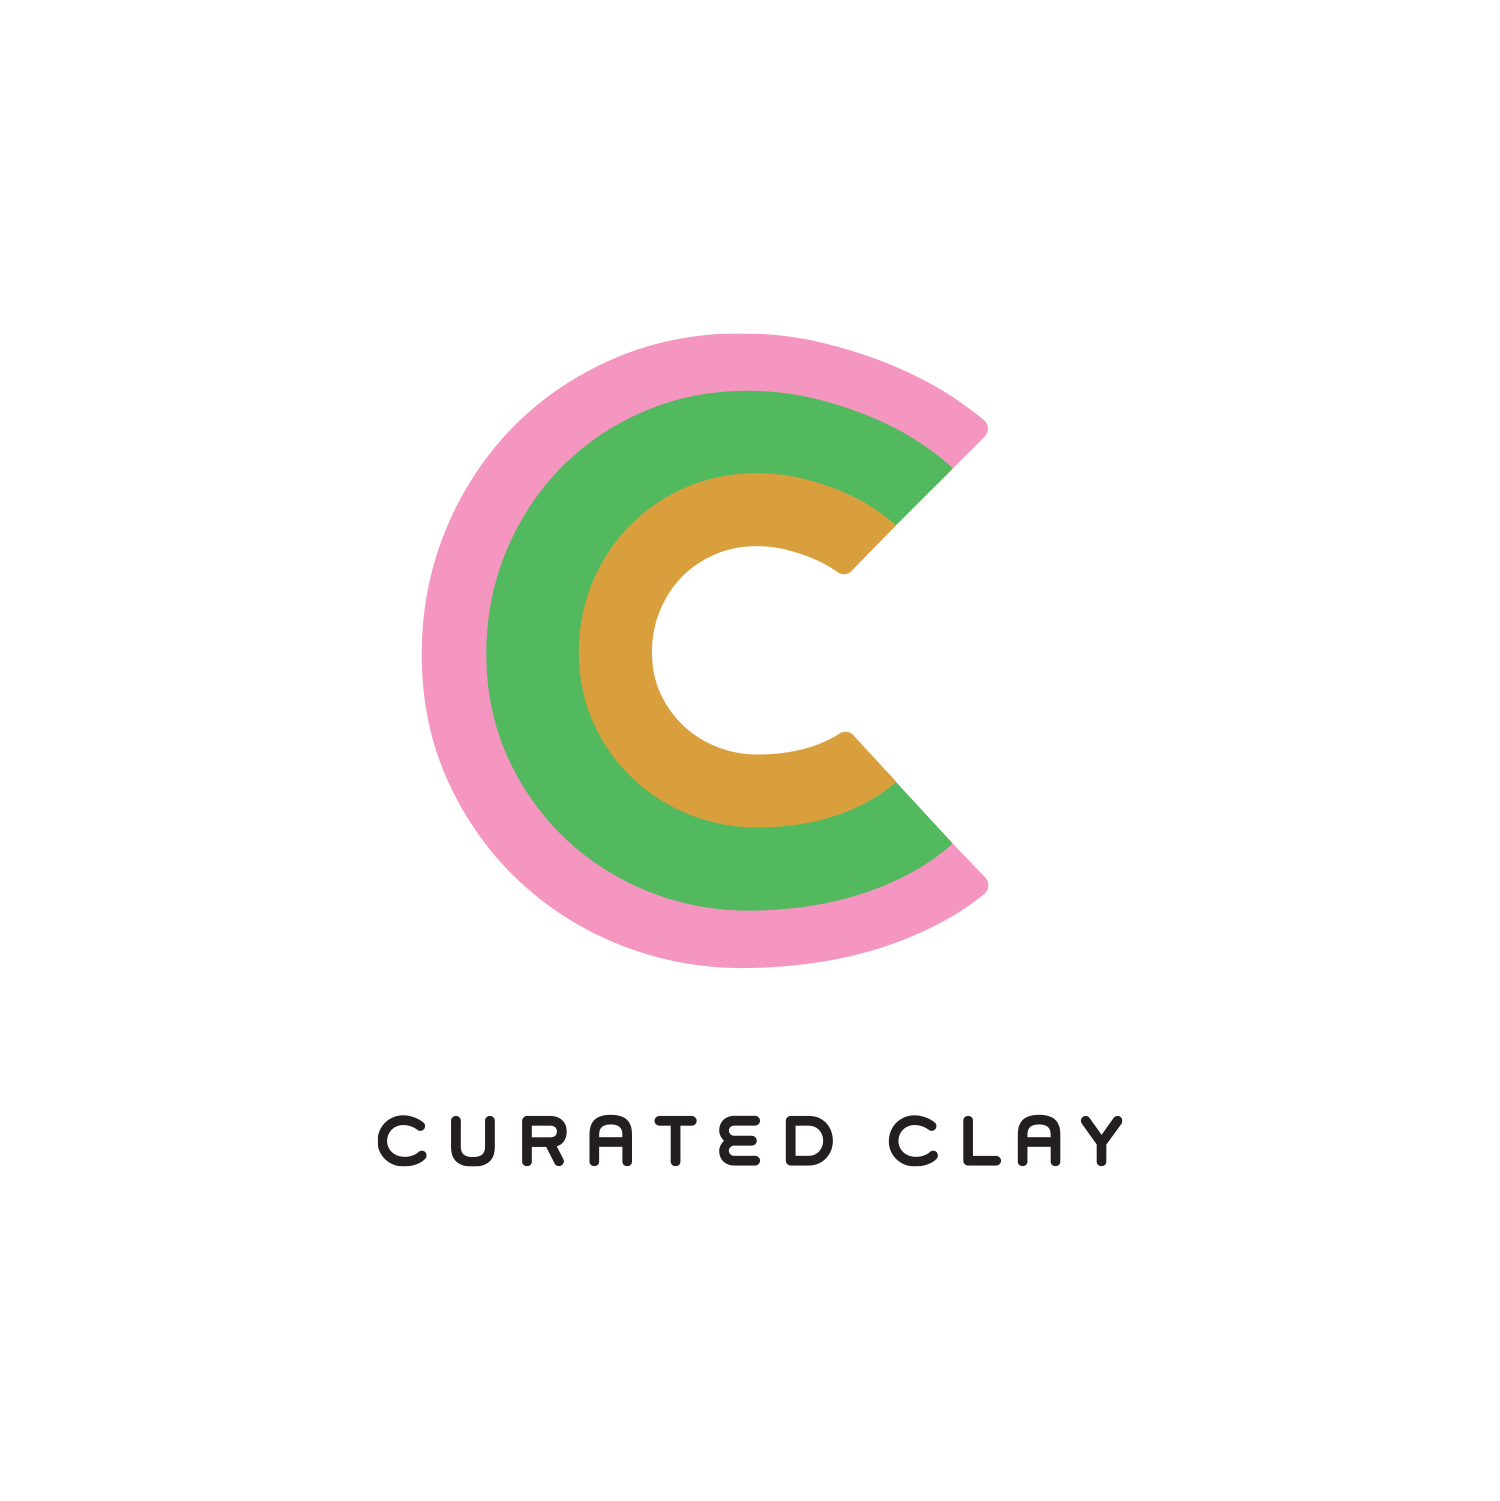 Curated Clay logo by OLSON MCINTYRE